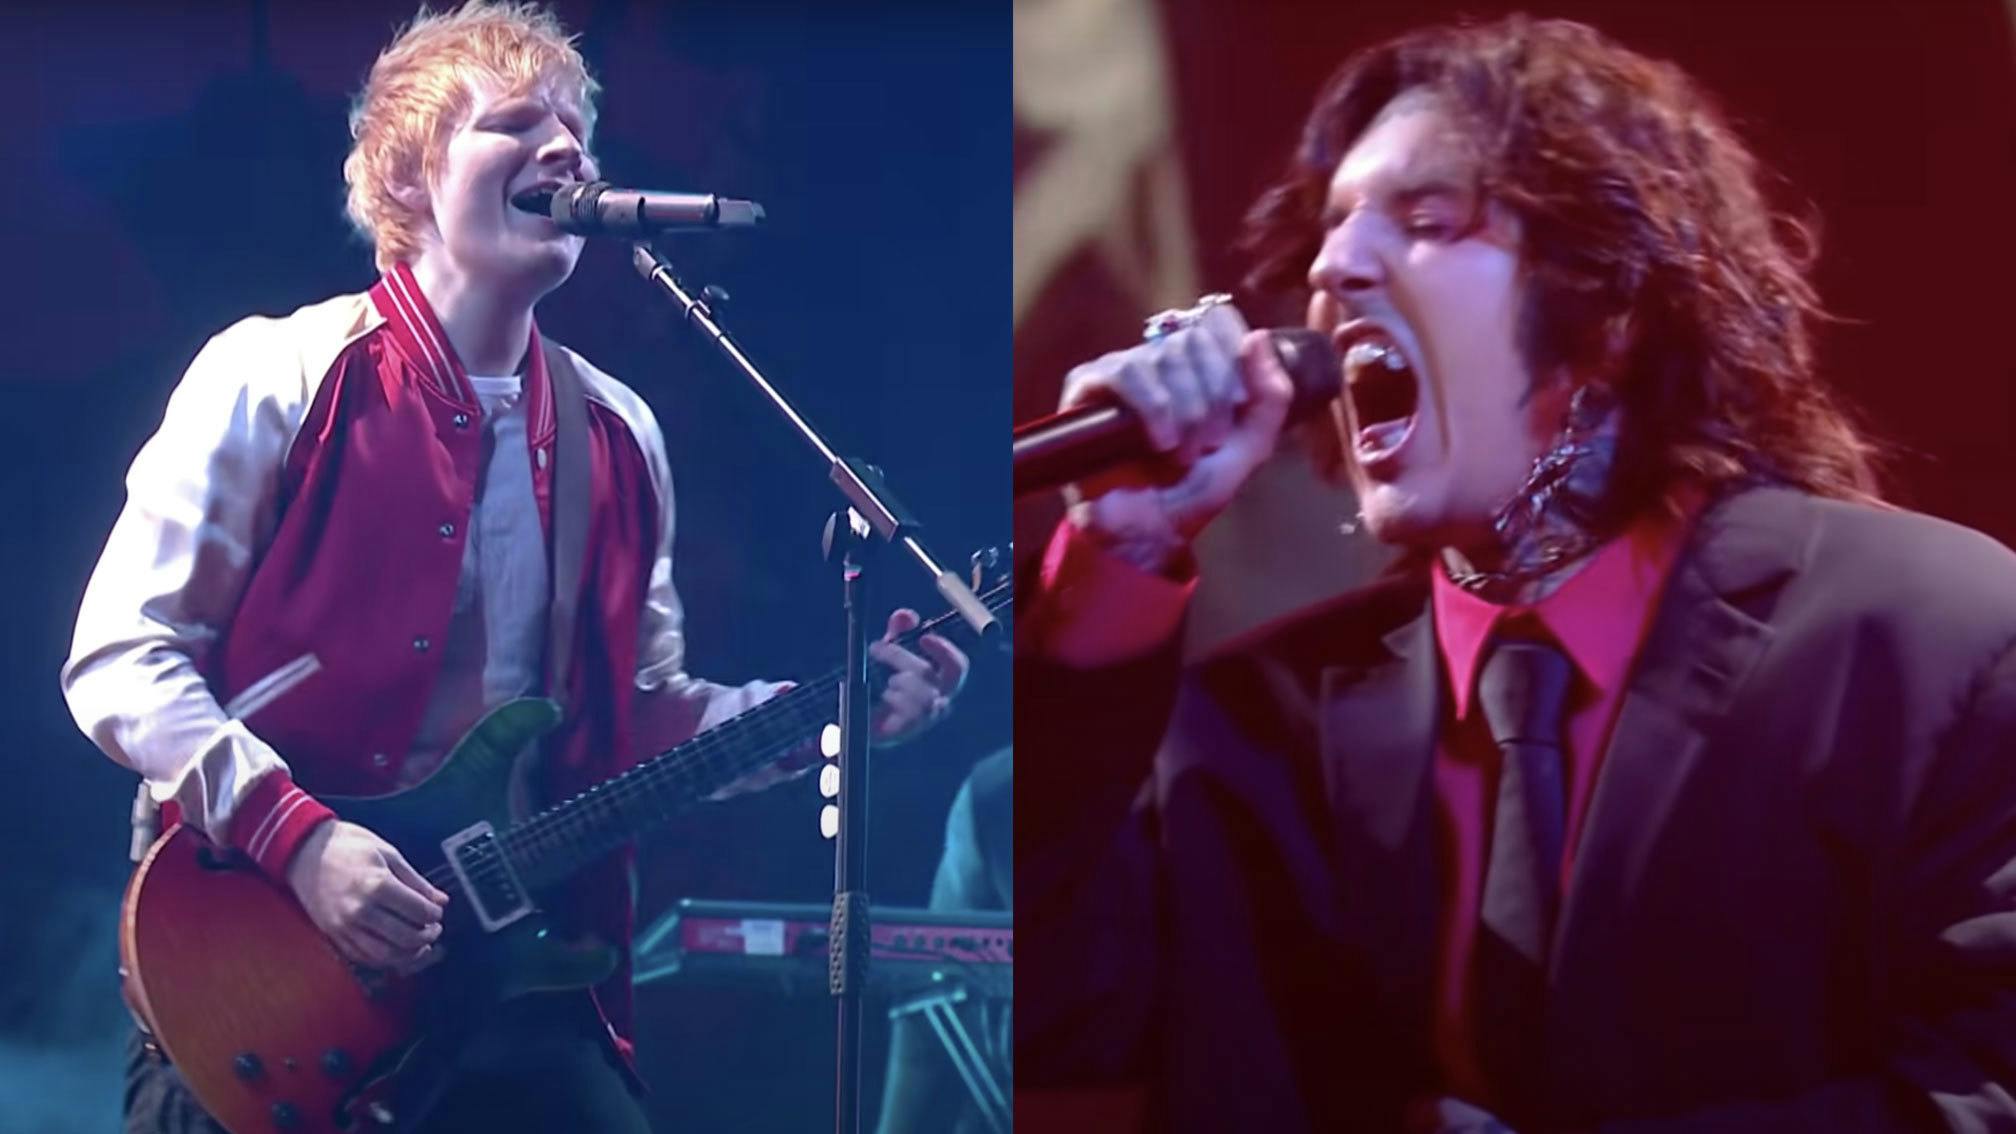 Surprise! Bring Me The Horizon join Ed Sheeran for BRITs 2022 opening performance